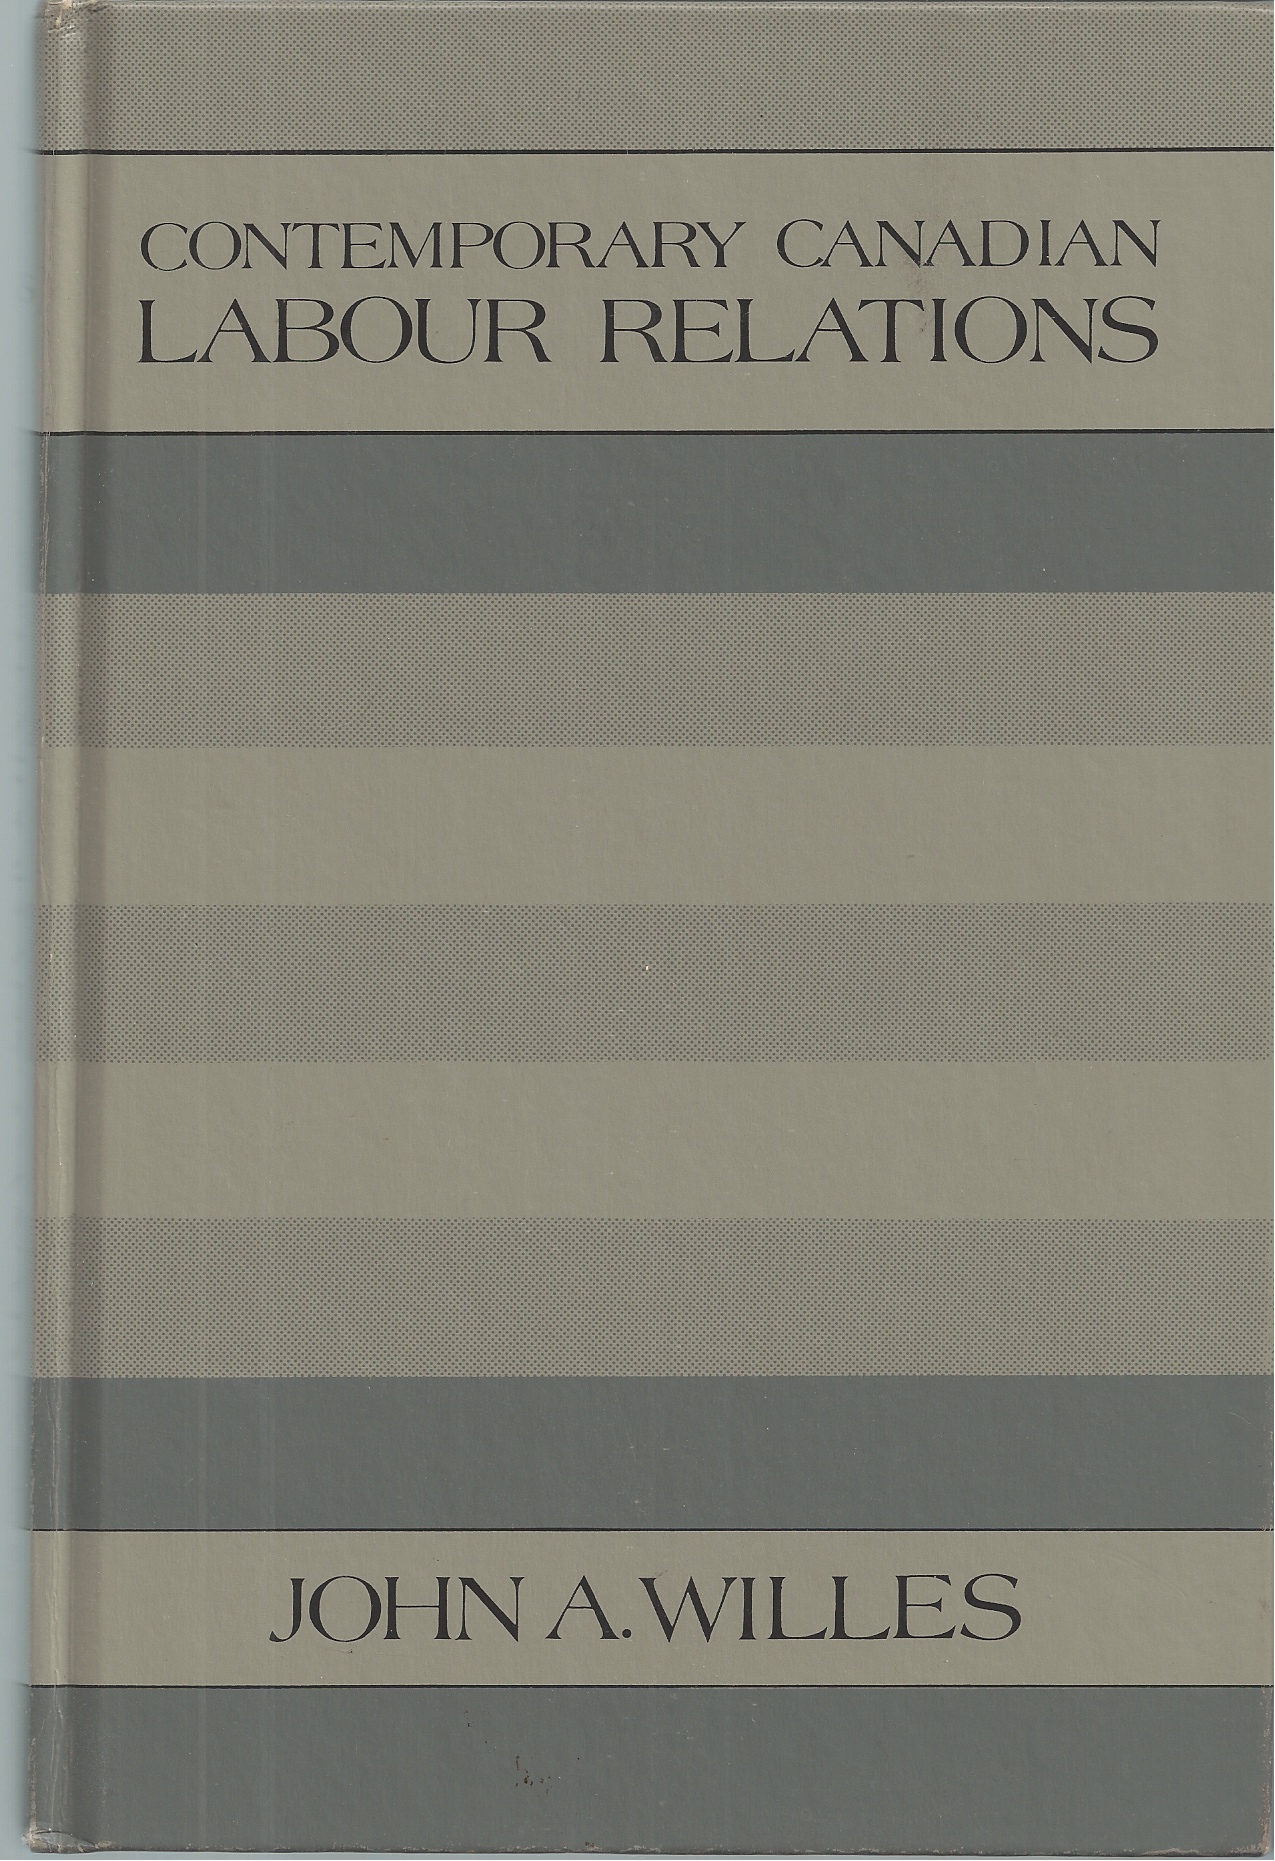 WILLES JOHN A. - Contemporary Canadian Labour Relations